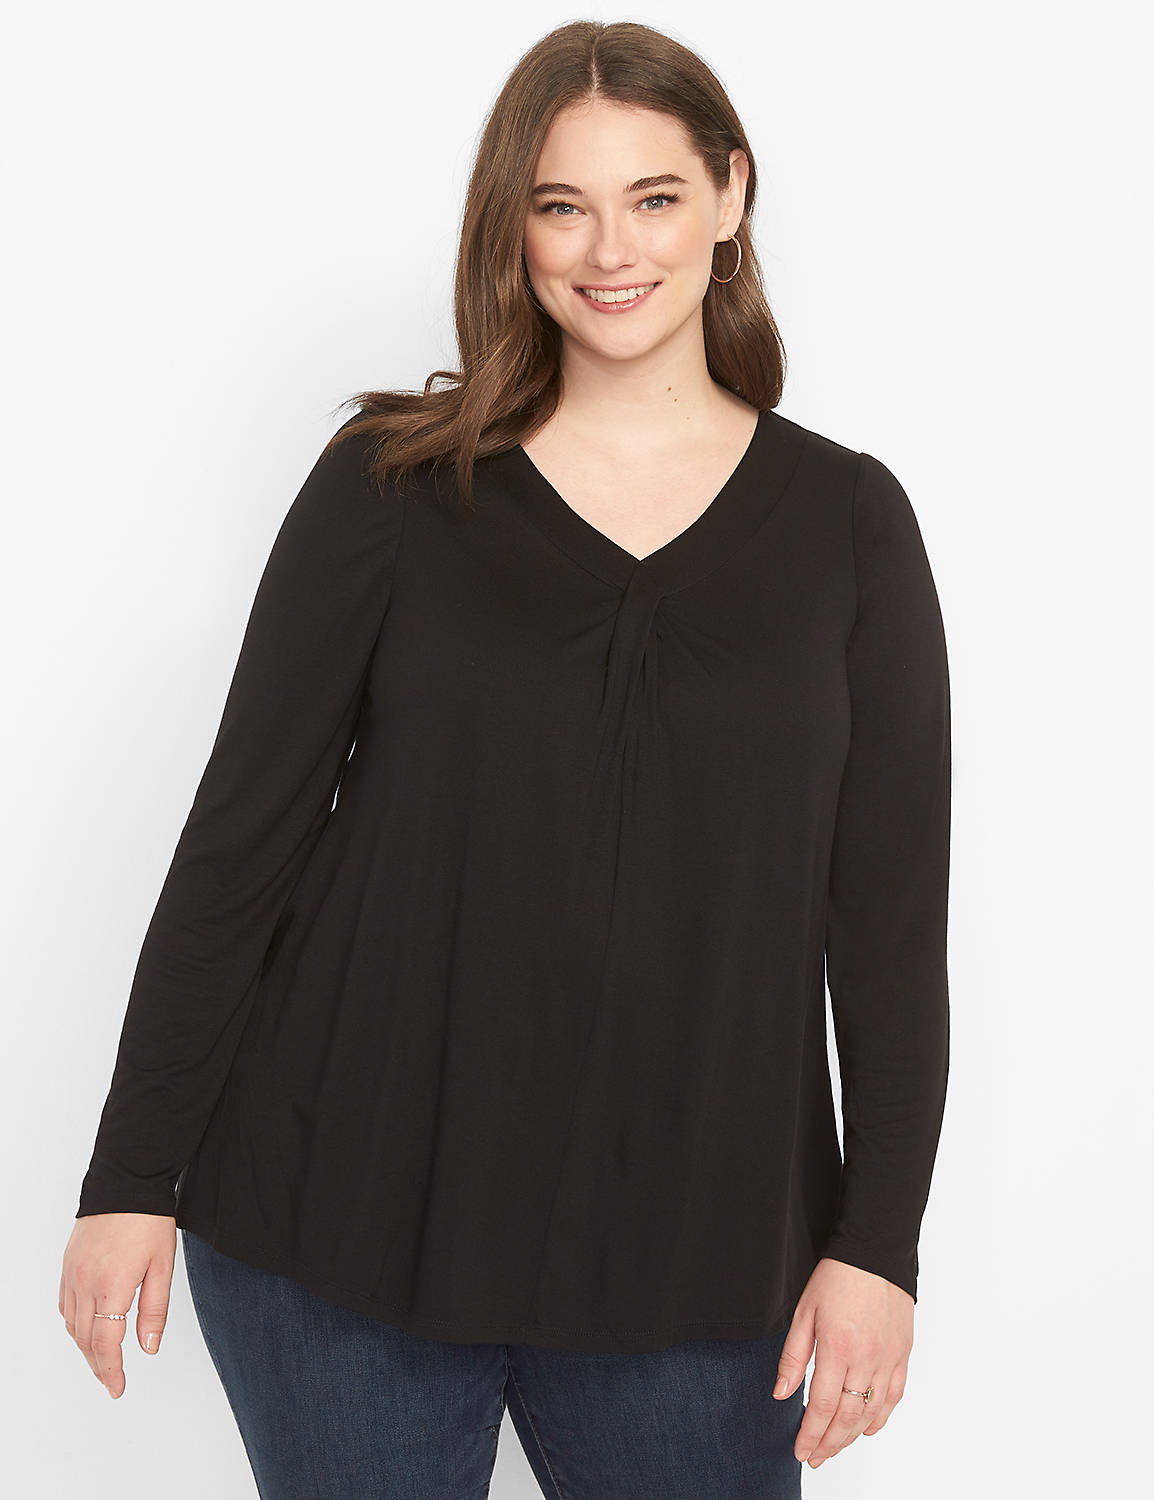 Long Sleeve Perfect Sleeve Wrap Front Swing Tee 1127632:Ascena Black:10/12 Product Image 1